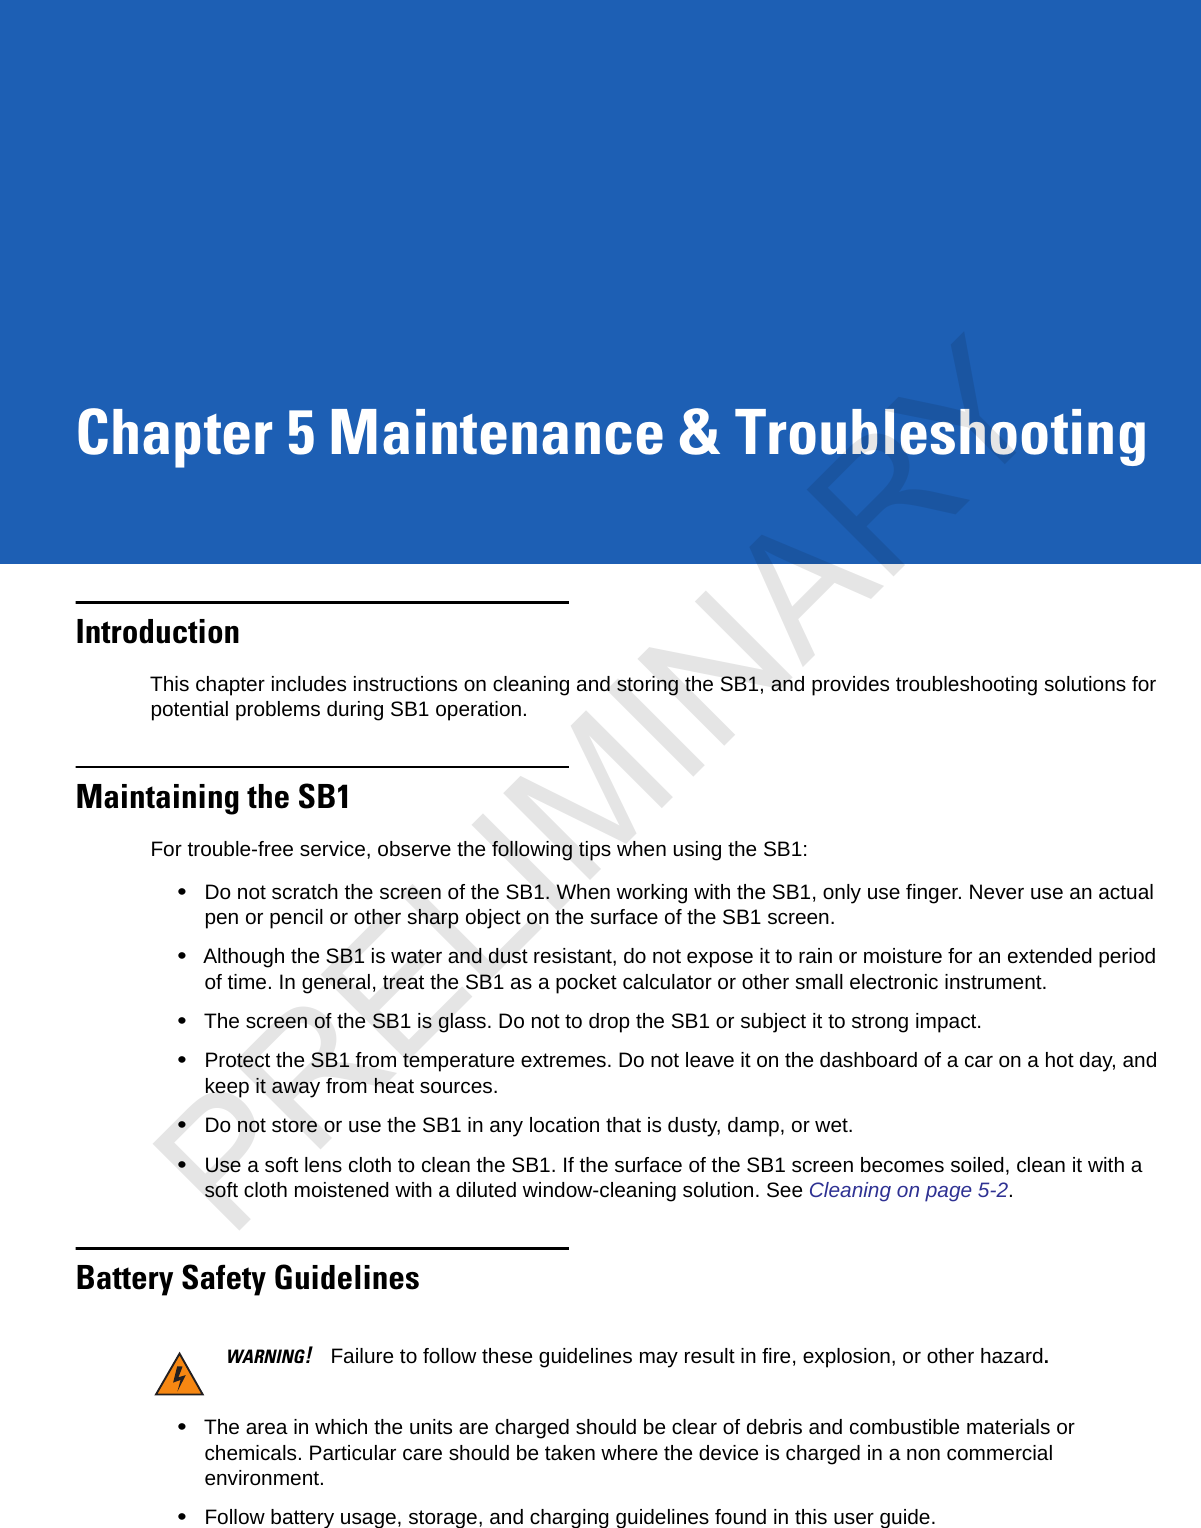 Chapter 5 Maintenance &amp; TroubleshootingIntroductionThis chapter includes instructions on cleaning and storing the SB1, and provides troubleshooting solutions for potential problems during SB1 operation.Maintaining the SB1For trouble-free service, observe the following tips when using the SB1:•Do not scratch the screen of the SB1. When working with the SB1, only use finger. Never use an actual pen or pencil or other sharp object on the surface of the SB1 screen.•Although the SB1 is water and dust resistant, do not expose it to rain or moisture for an extended period of time. In general, treat the SB1 as a pocket calculator or other small electronic instrument.•The screen of the SB1 is glass. Do not to drop the SB1 or subject it to strong impact.•Protect the SB1 from temperature extremes. Do not leave it on the dashboard of a car on a hot day, and keep it away from heat sources.•Do not store or use the SB1 in any location that is dusty, damp, or wet.•Use a soft lens cloth to clean the SB1. If the surface of the SB1 screen becomes soiled, clean it with a soft cloth moistened with a diluted window-cleaning solution. See Cleaning on page 5-2.Battery Safety GuidelinesWARNING!Failure to follow these guidelines may result in fire, explosion, or other hazard.•The area in which the units are charged should be clear of debris and combustible materials or chemicals. Particular care should be taken where the device is charged in a non commercial environment.•Follow battery usage, storage, and charging guidelines found in this user guide.PRELIMINARY